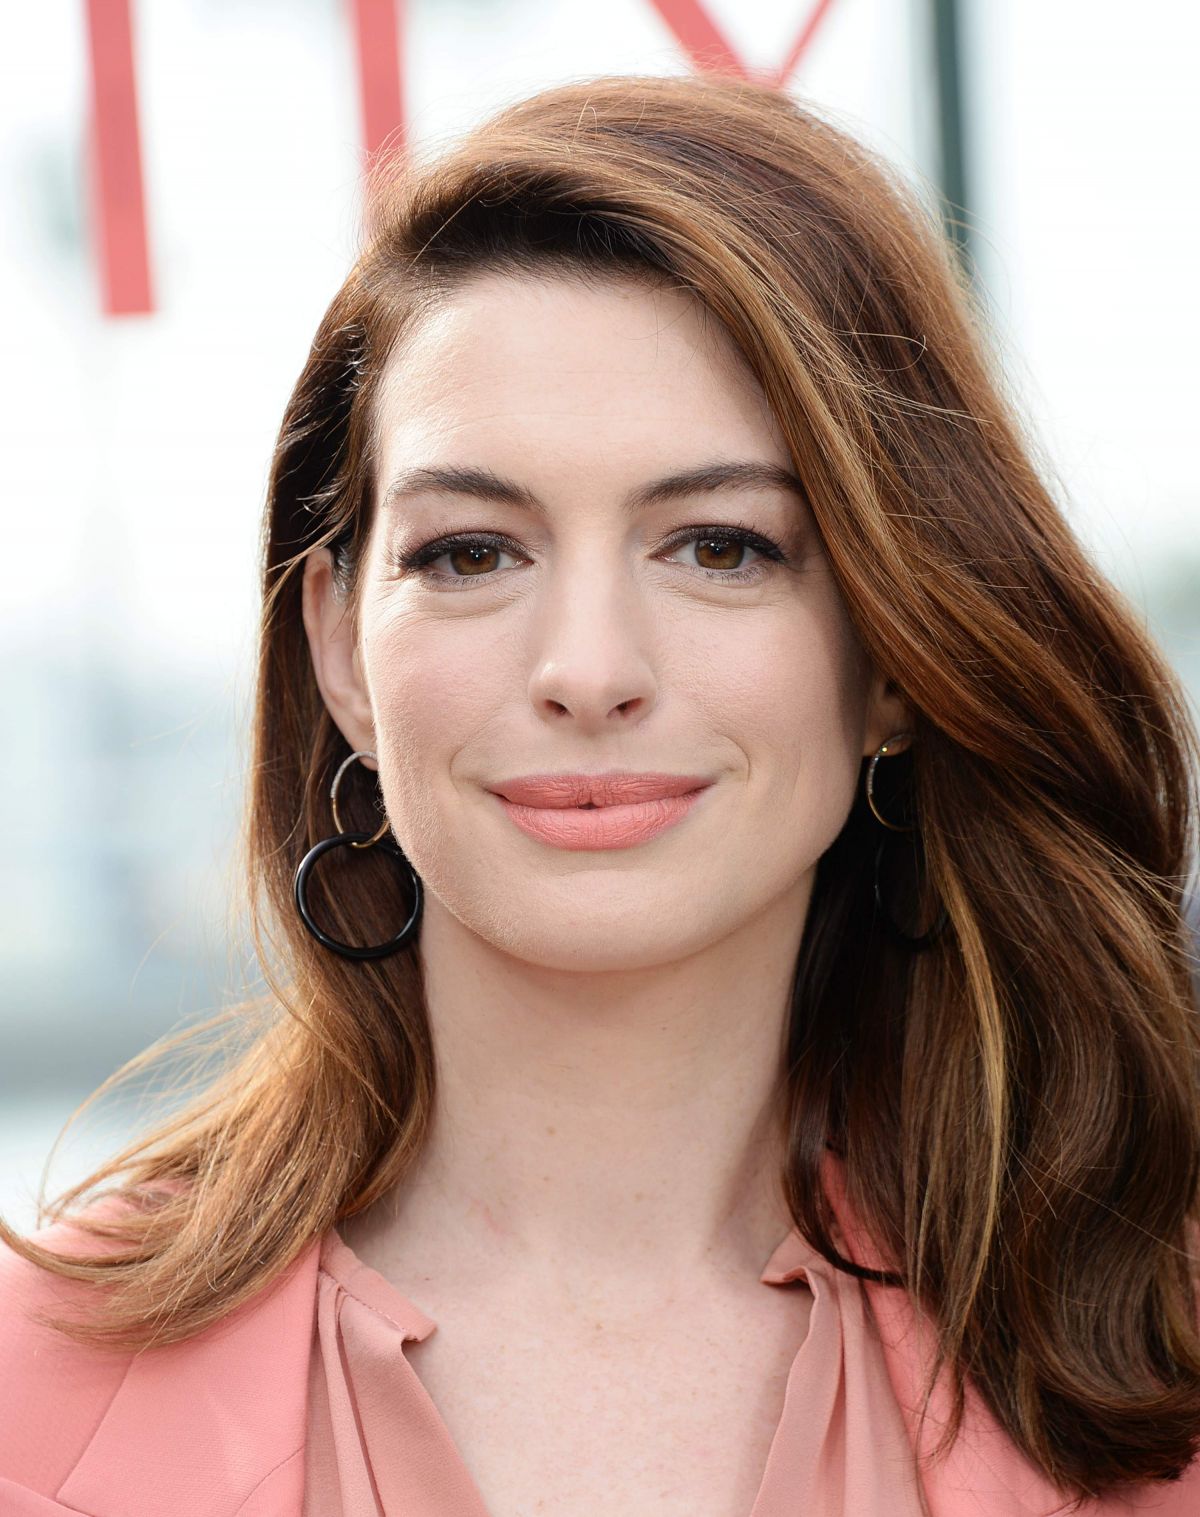 ANNE HATHAWAY at Serenity Photocall in Marina Del Rey 01/11/2019 ...